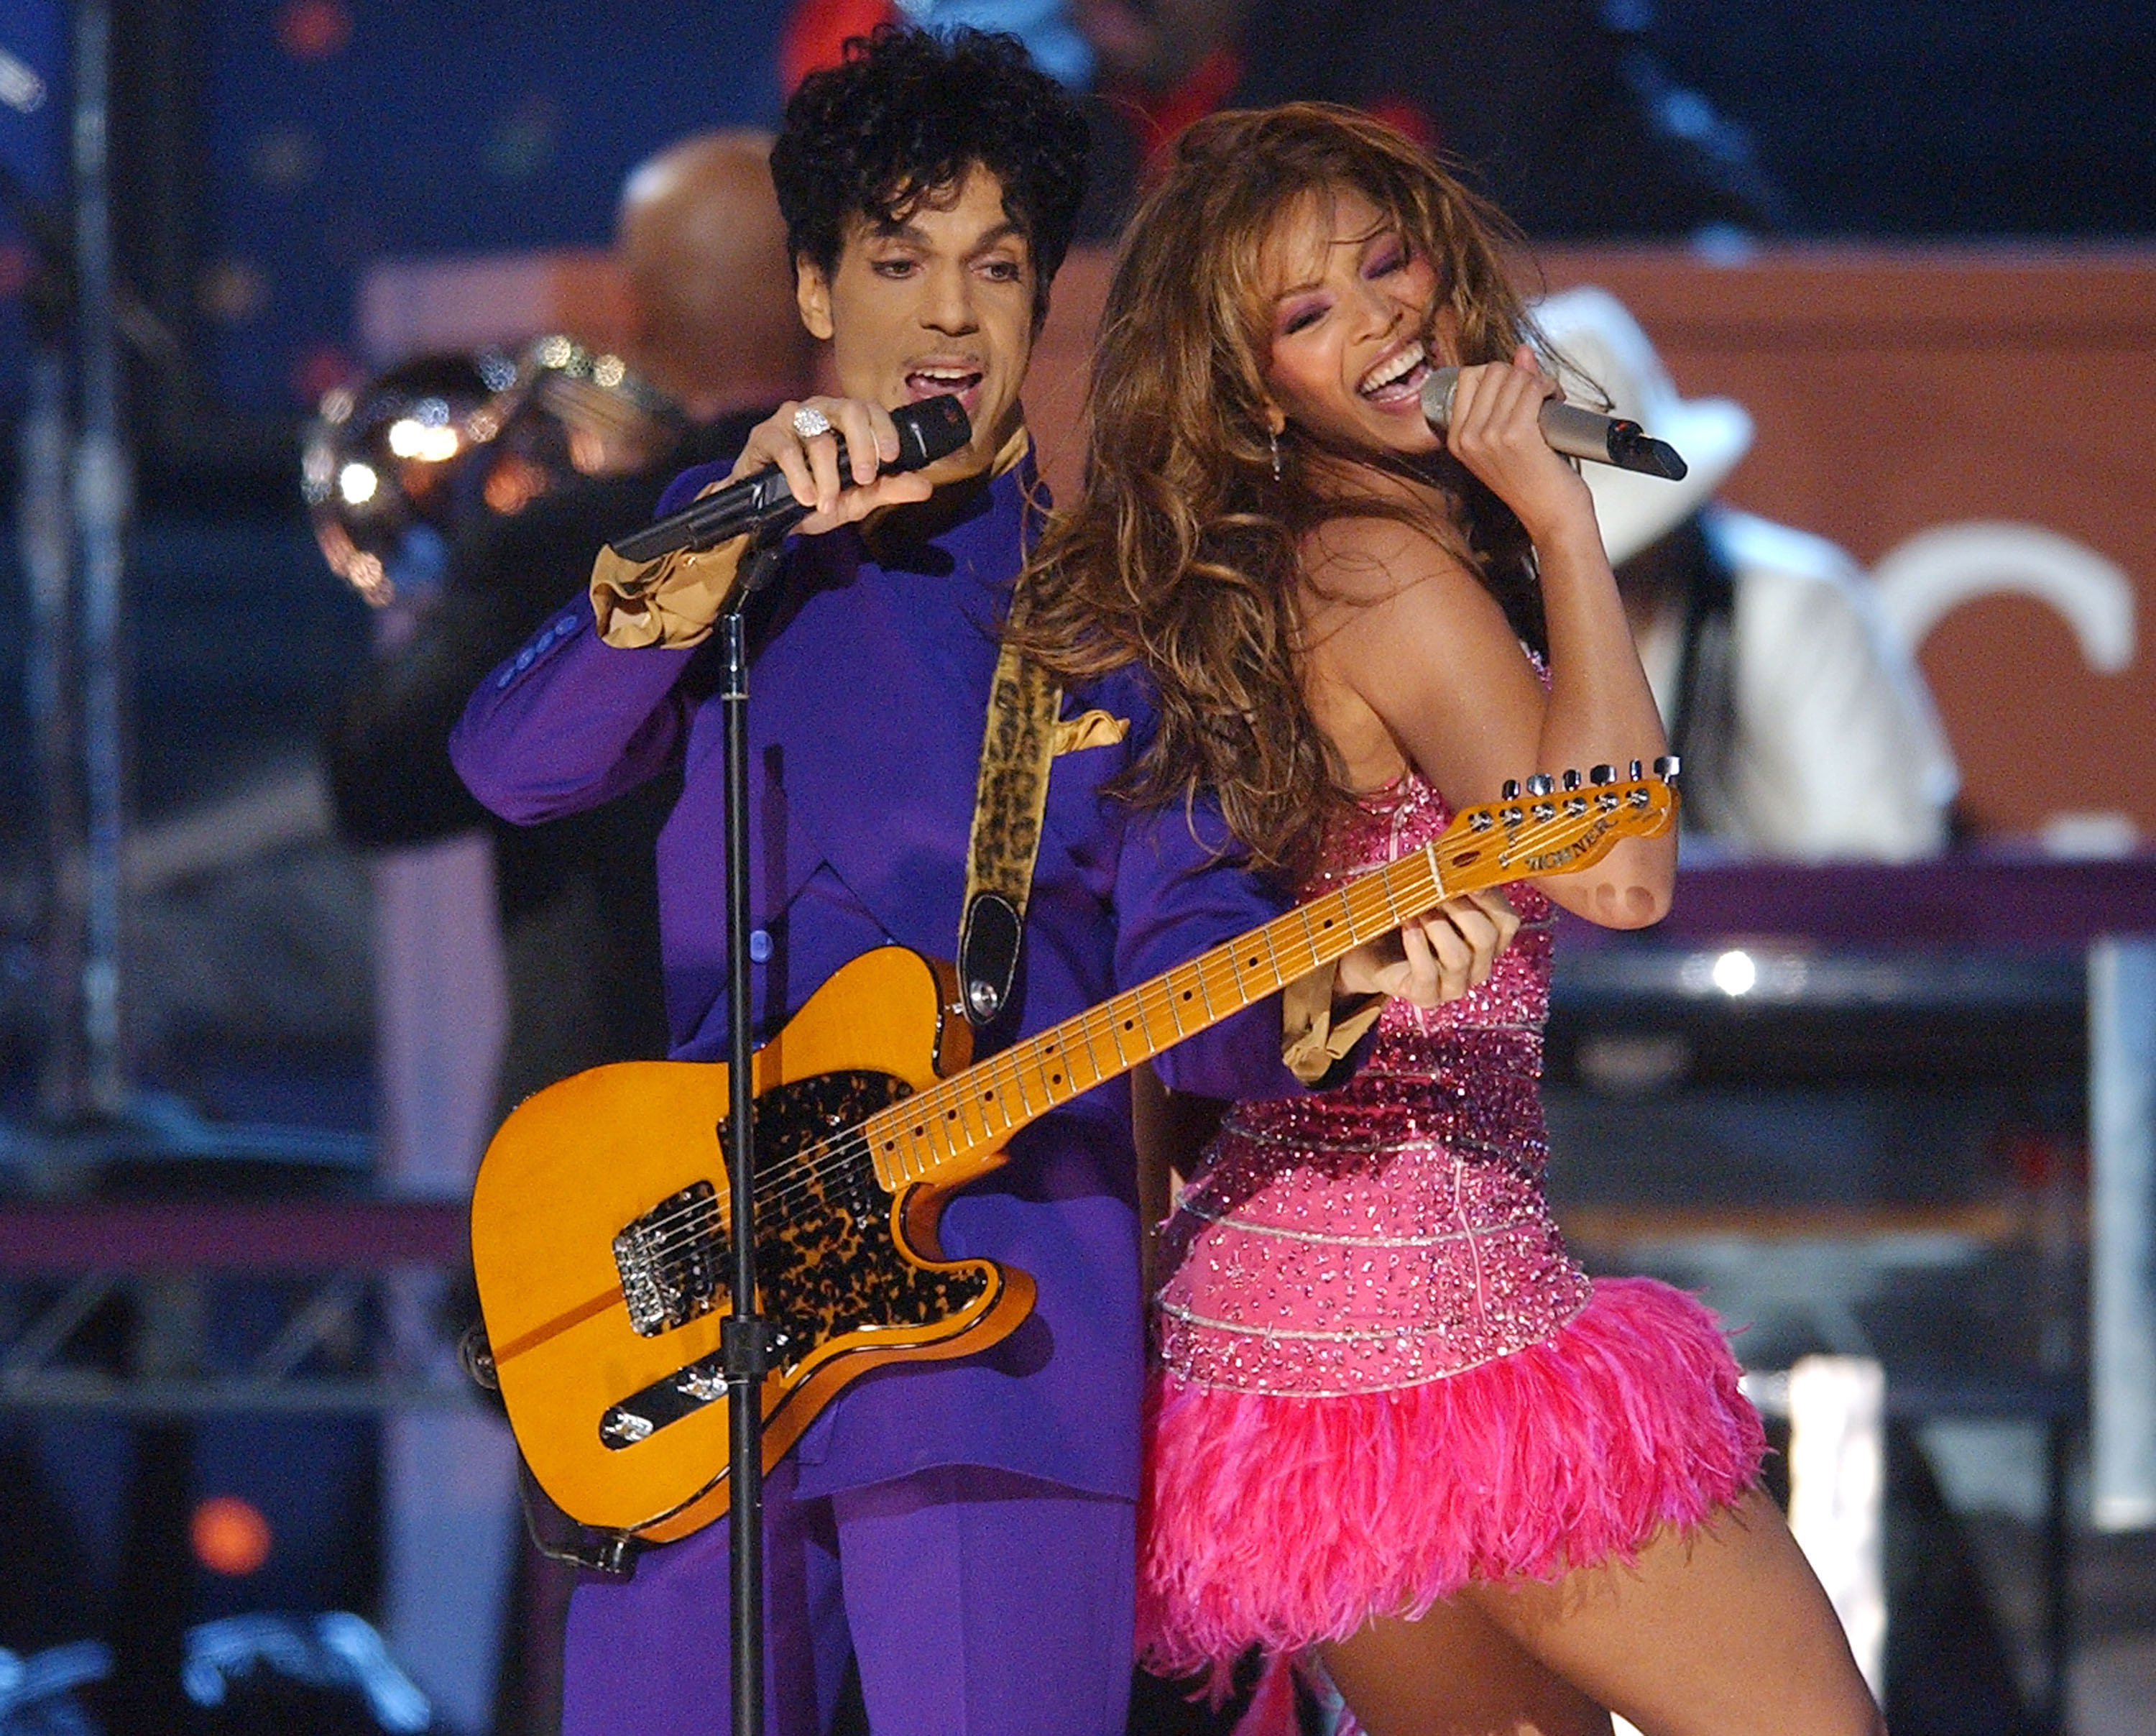 As if sharing the stage with the Purple One himself wasn't enough, Beyoncé also picked up five trophies at the 46th Annual Grammy Awards in 2004, including Best Contemporary R&amp;B Album for Dangerously in Love.